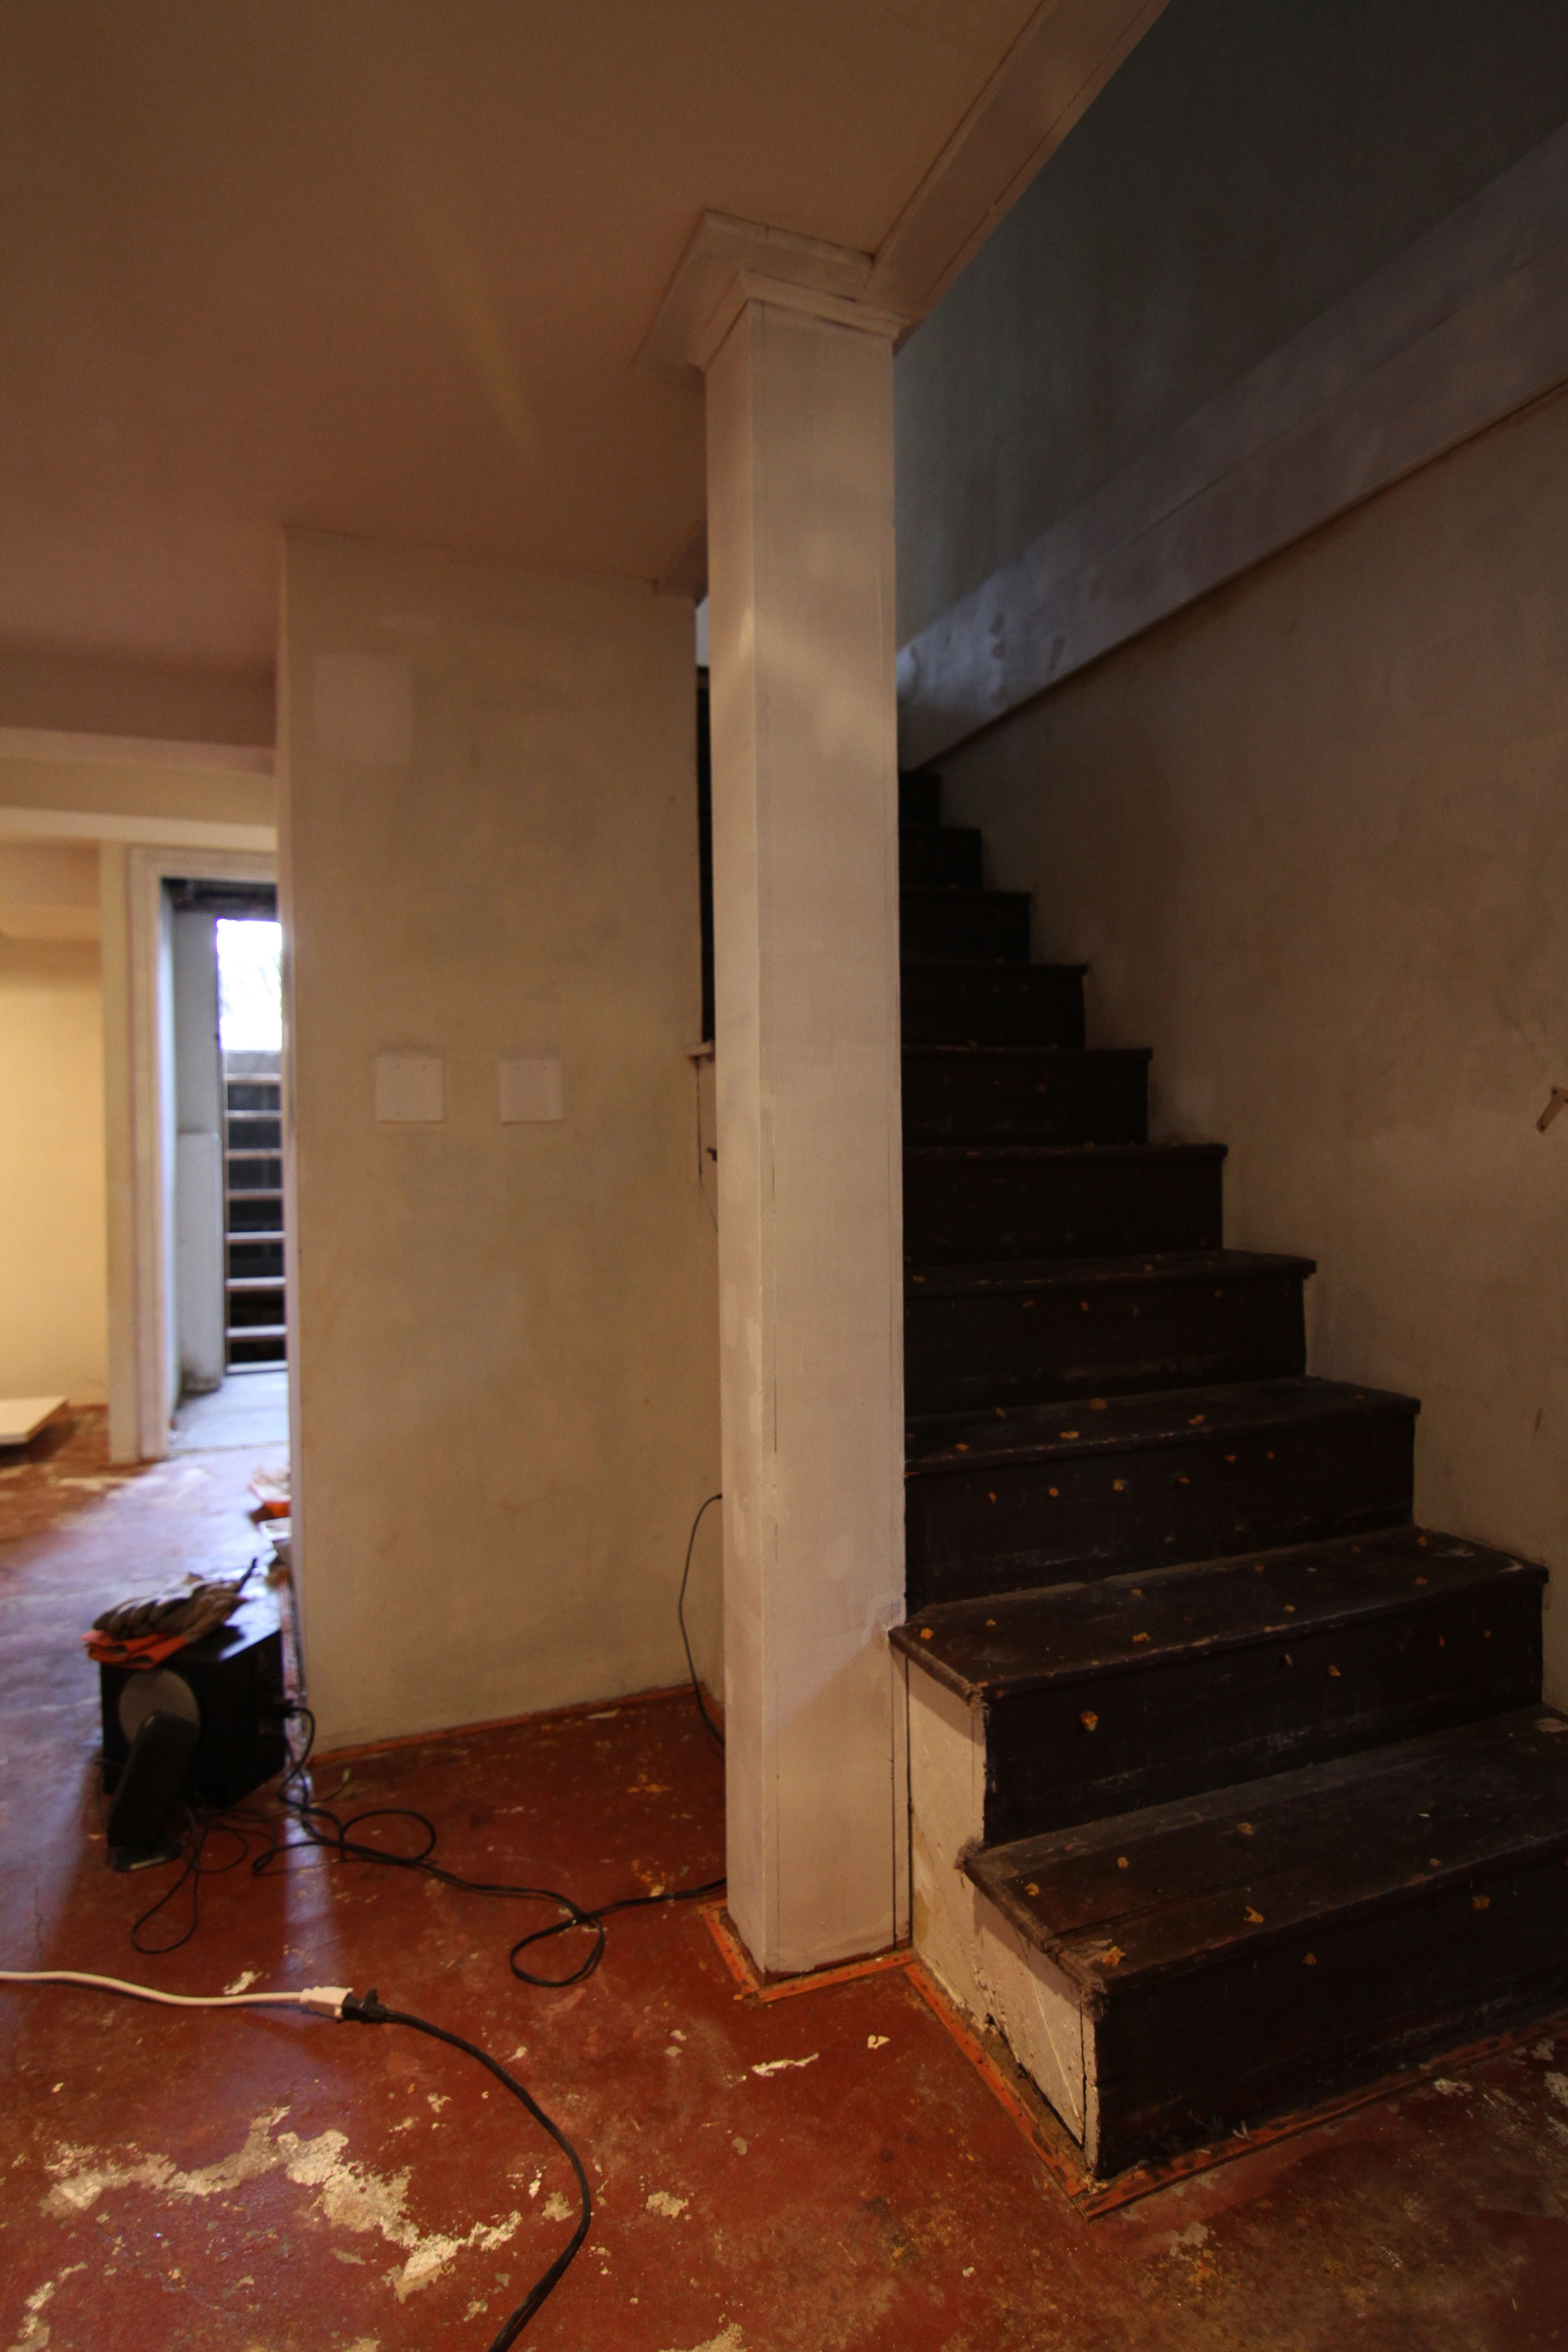 The original staircase color was dark brown. I felt instantly as if the stain color we chose for the main level was in keeping with this original spirit of the house.